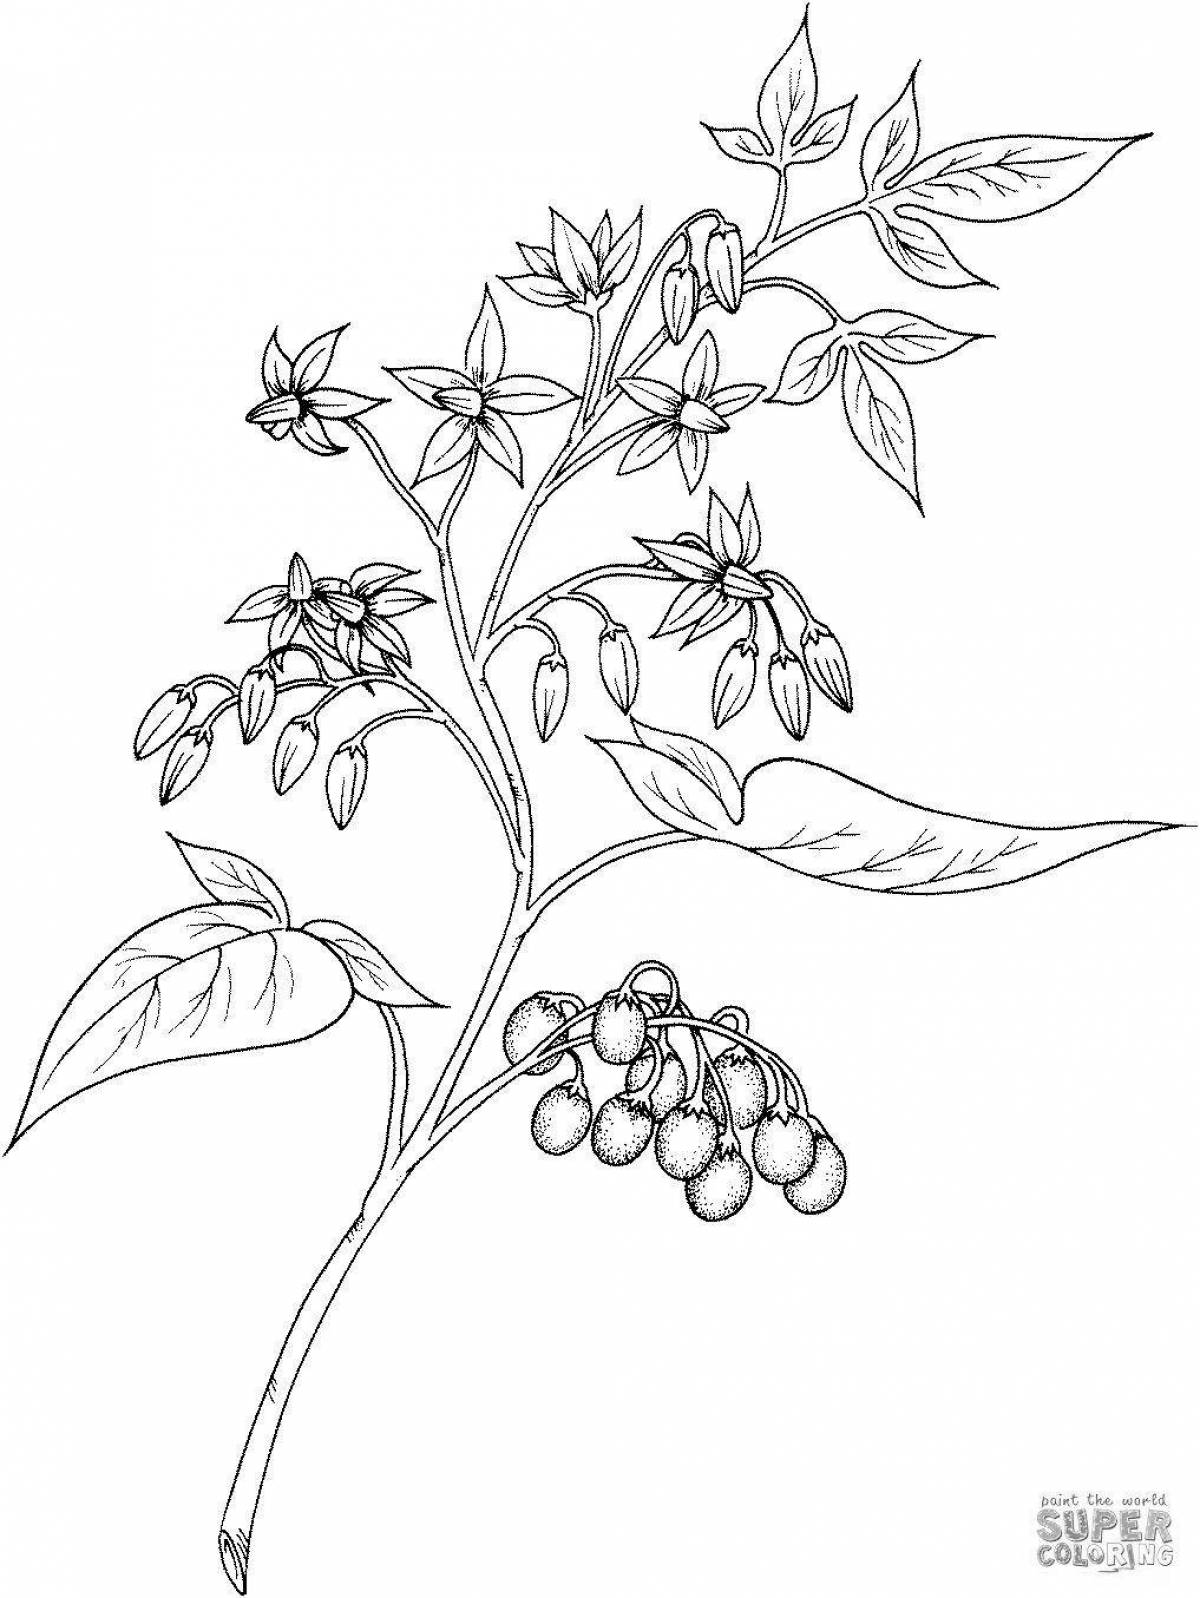 Colorful poisonous plants coloring pages for kids